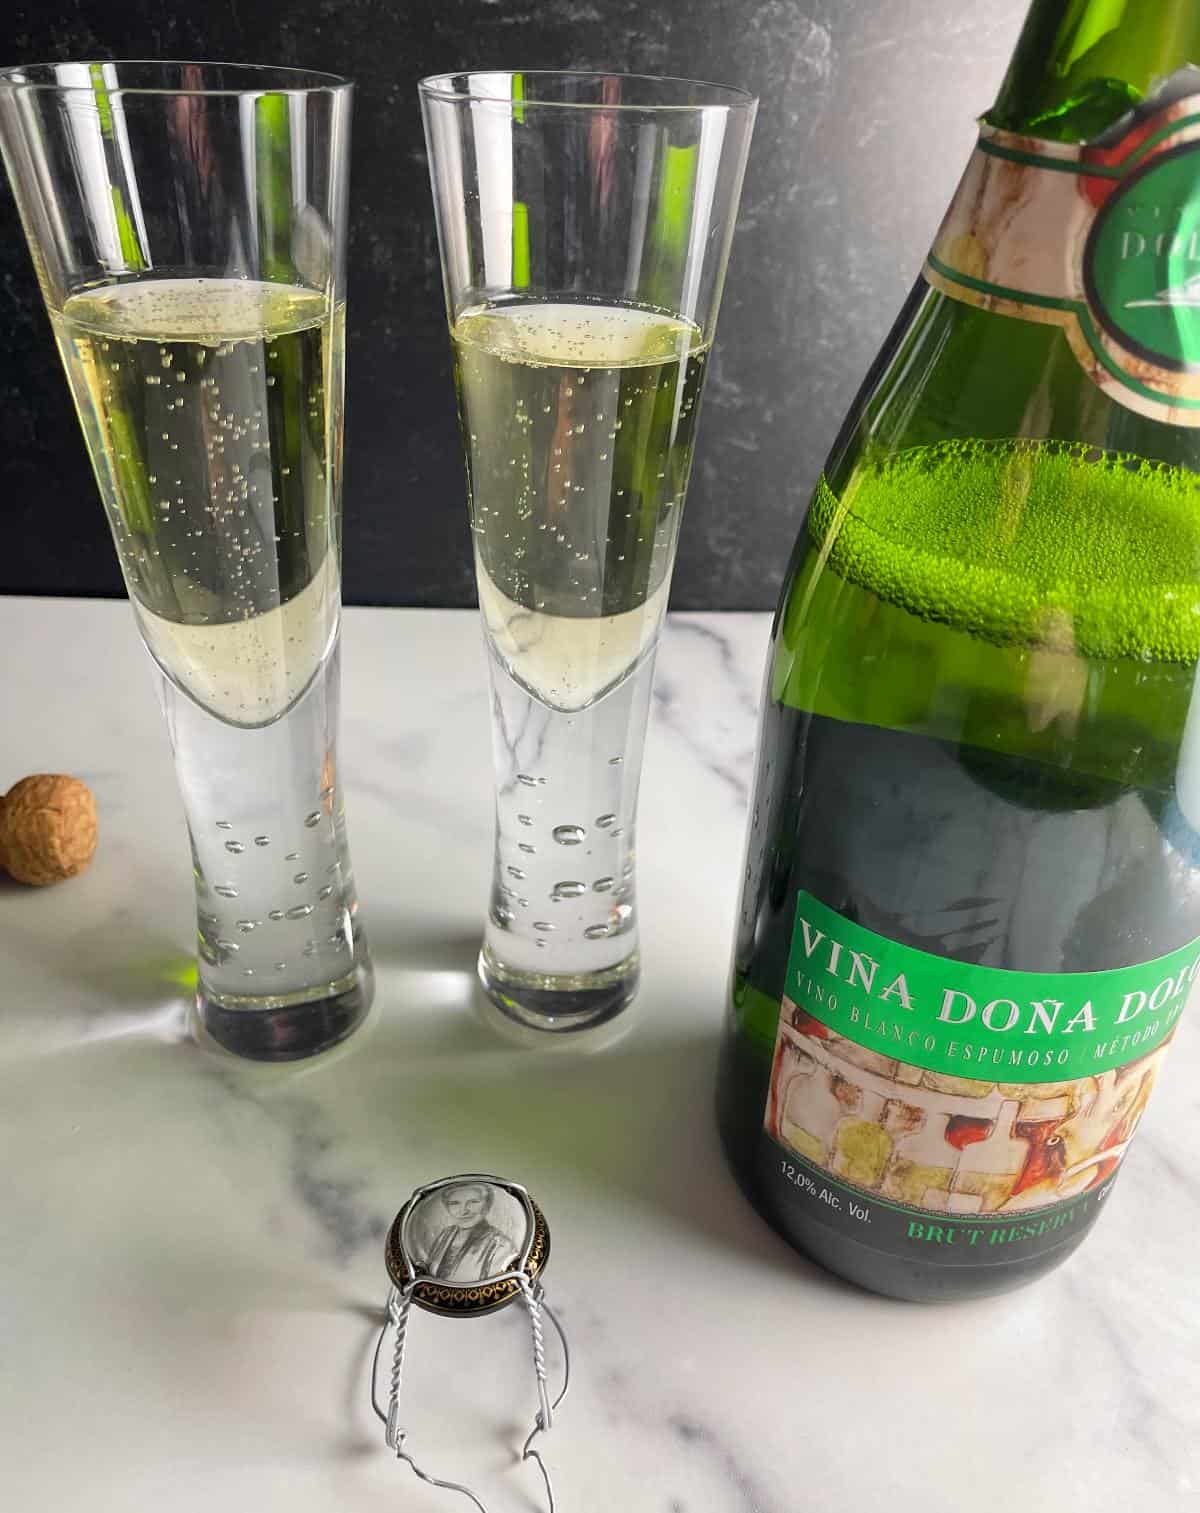 Two flutes with sparkling wine, alongside a bottle of Vina Dona Dolores bubbly.